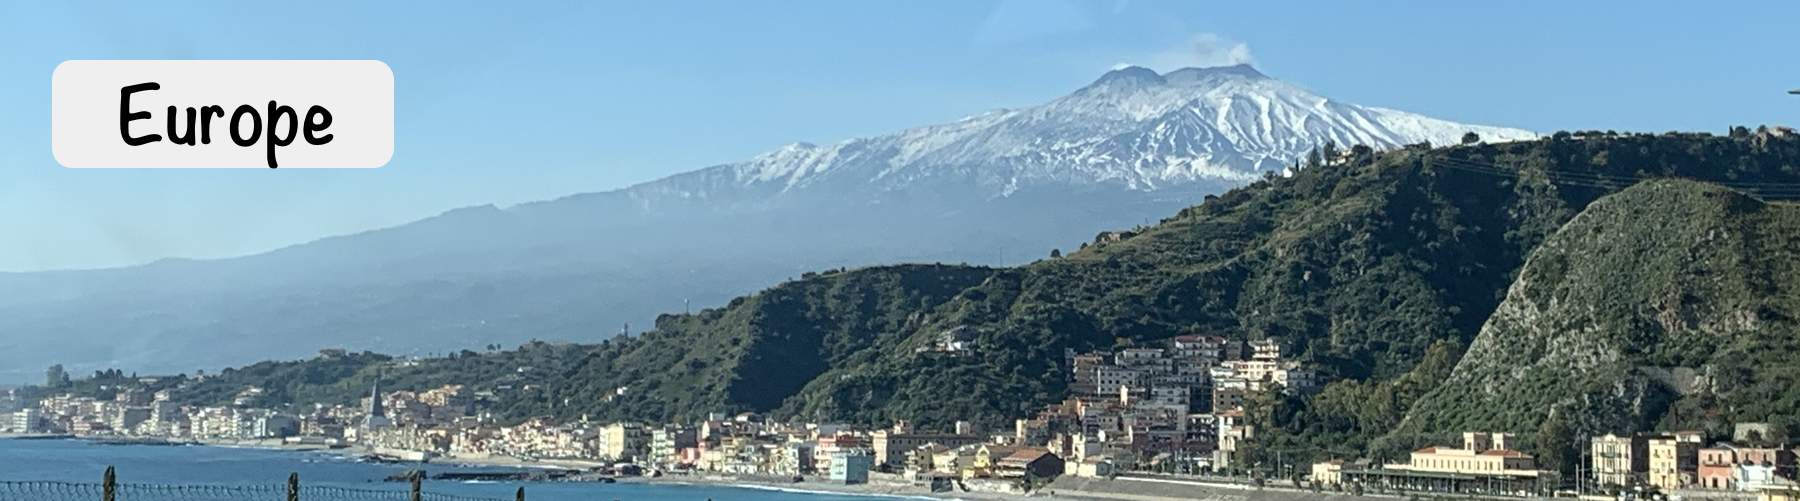 Title for our Europe trips - Mount Etna.